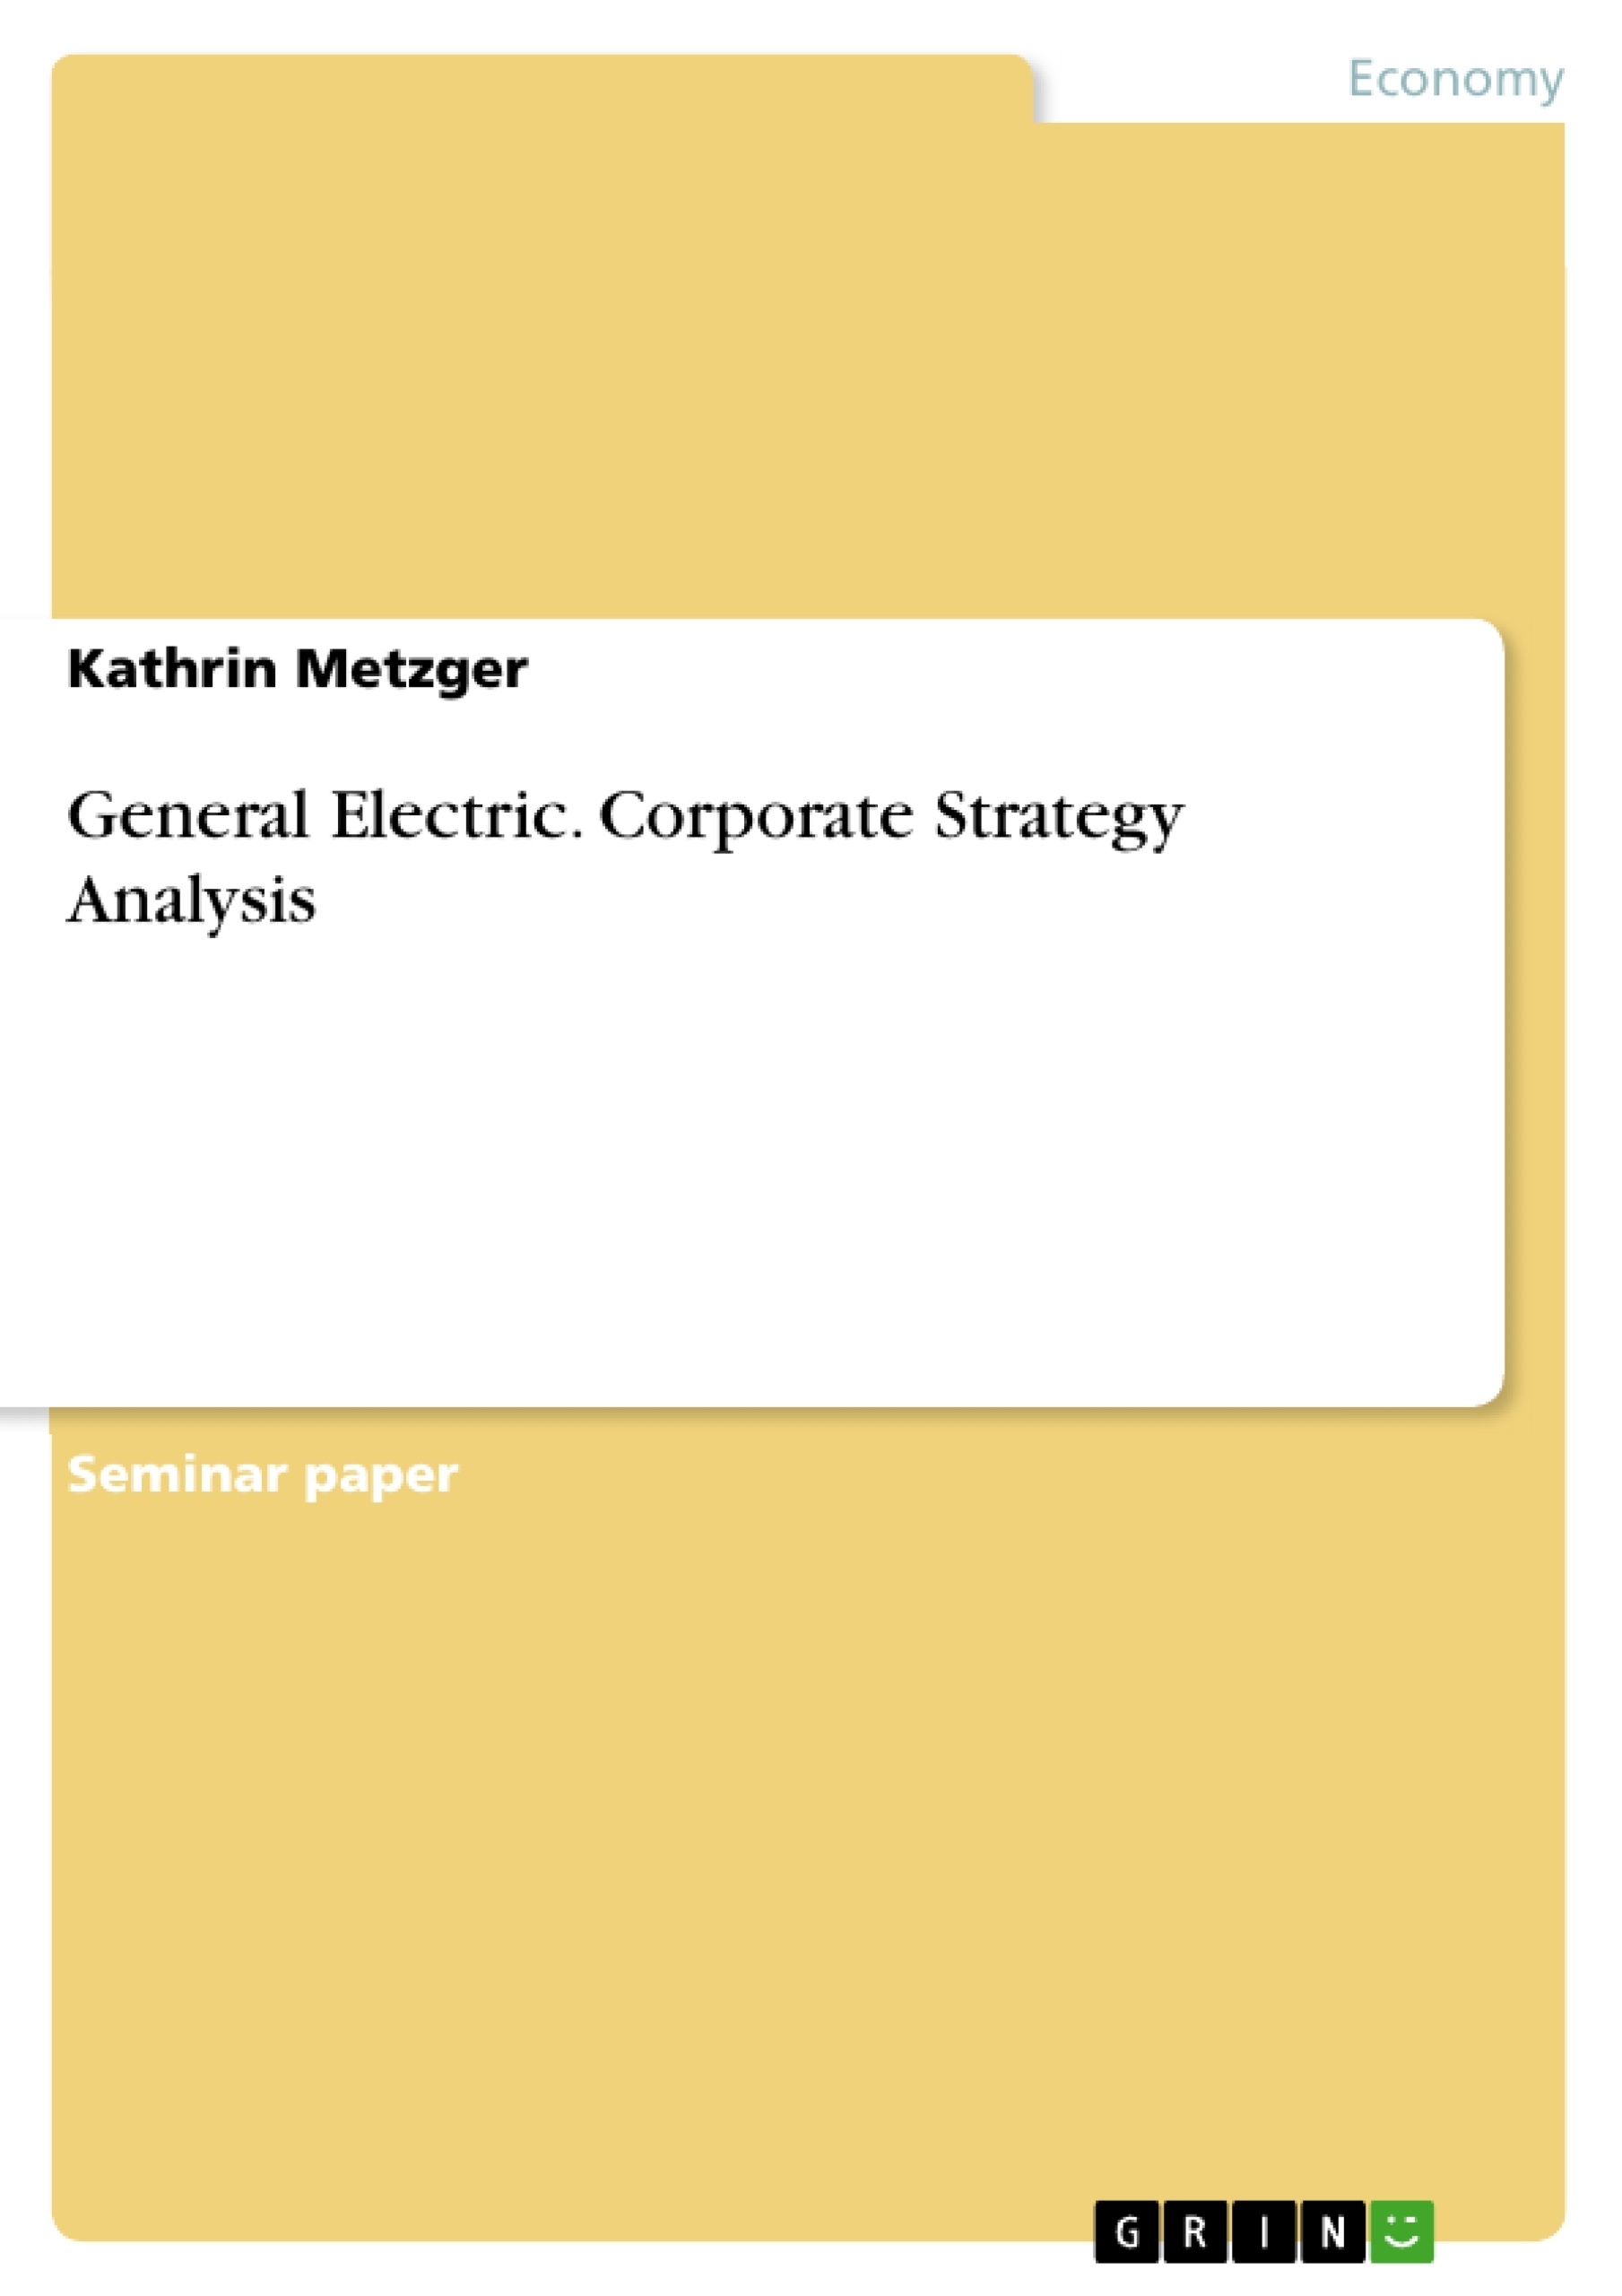 Title: General Electric. Corporate Strategy Analysis